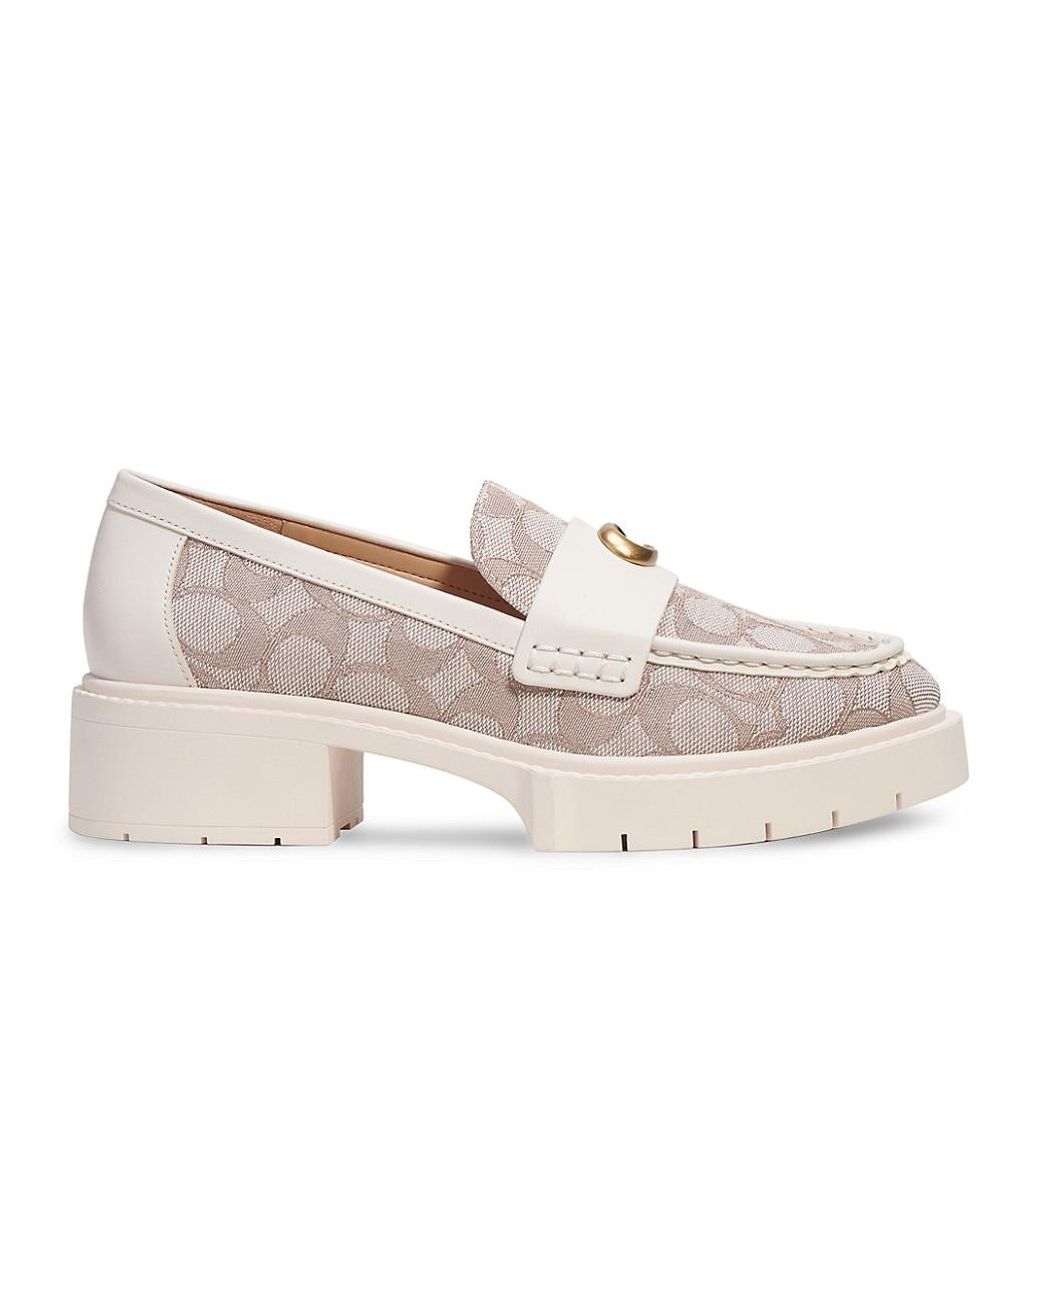 COACH Leah 44mm Jacquard & Leather Lug-sole Loafers in Natural | Lyst